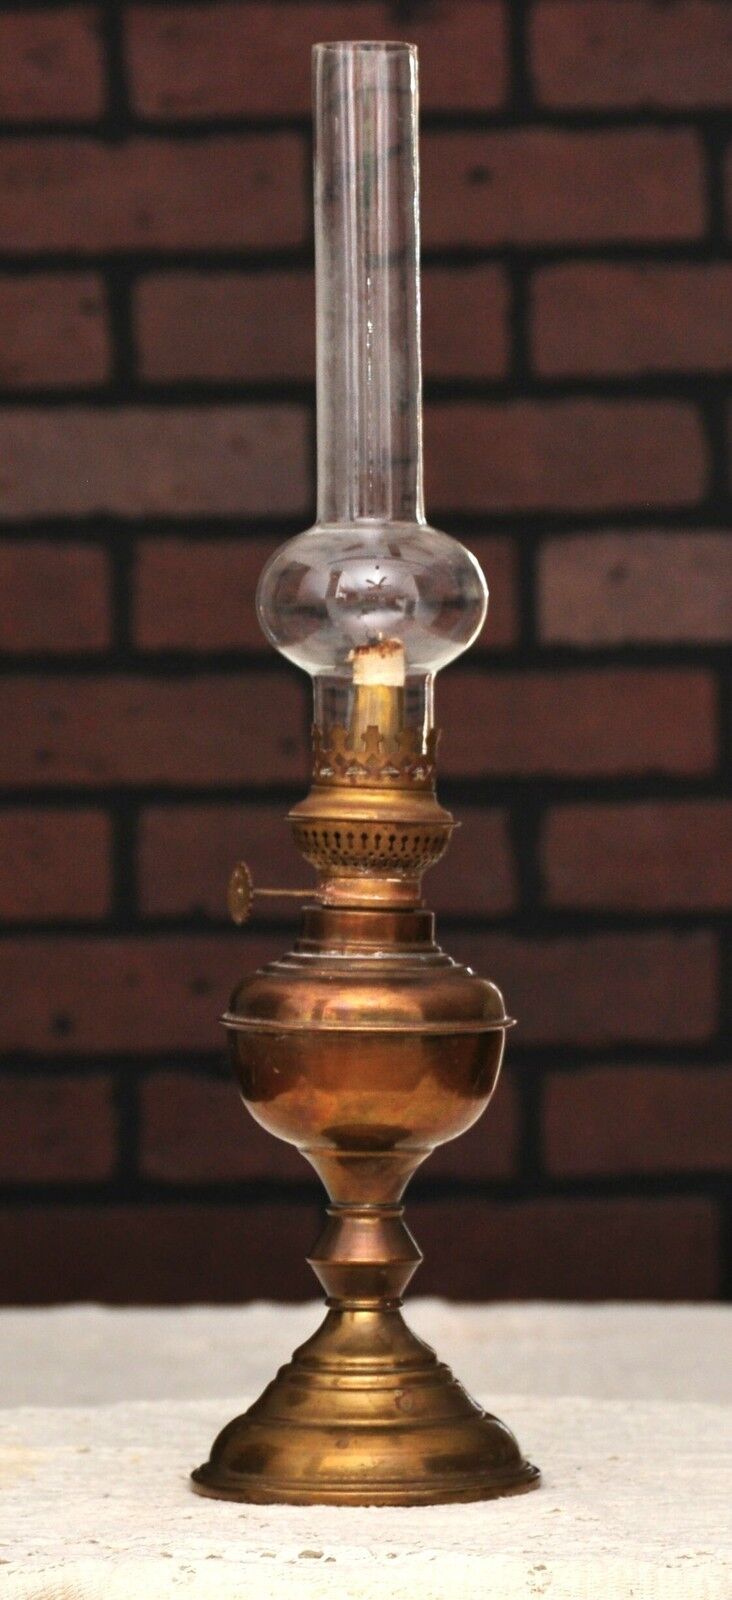 Squire Ltd Copper and Brass Oil Lamp with Chimney and Solid Brass Oil Burner